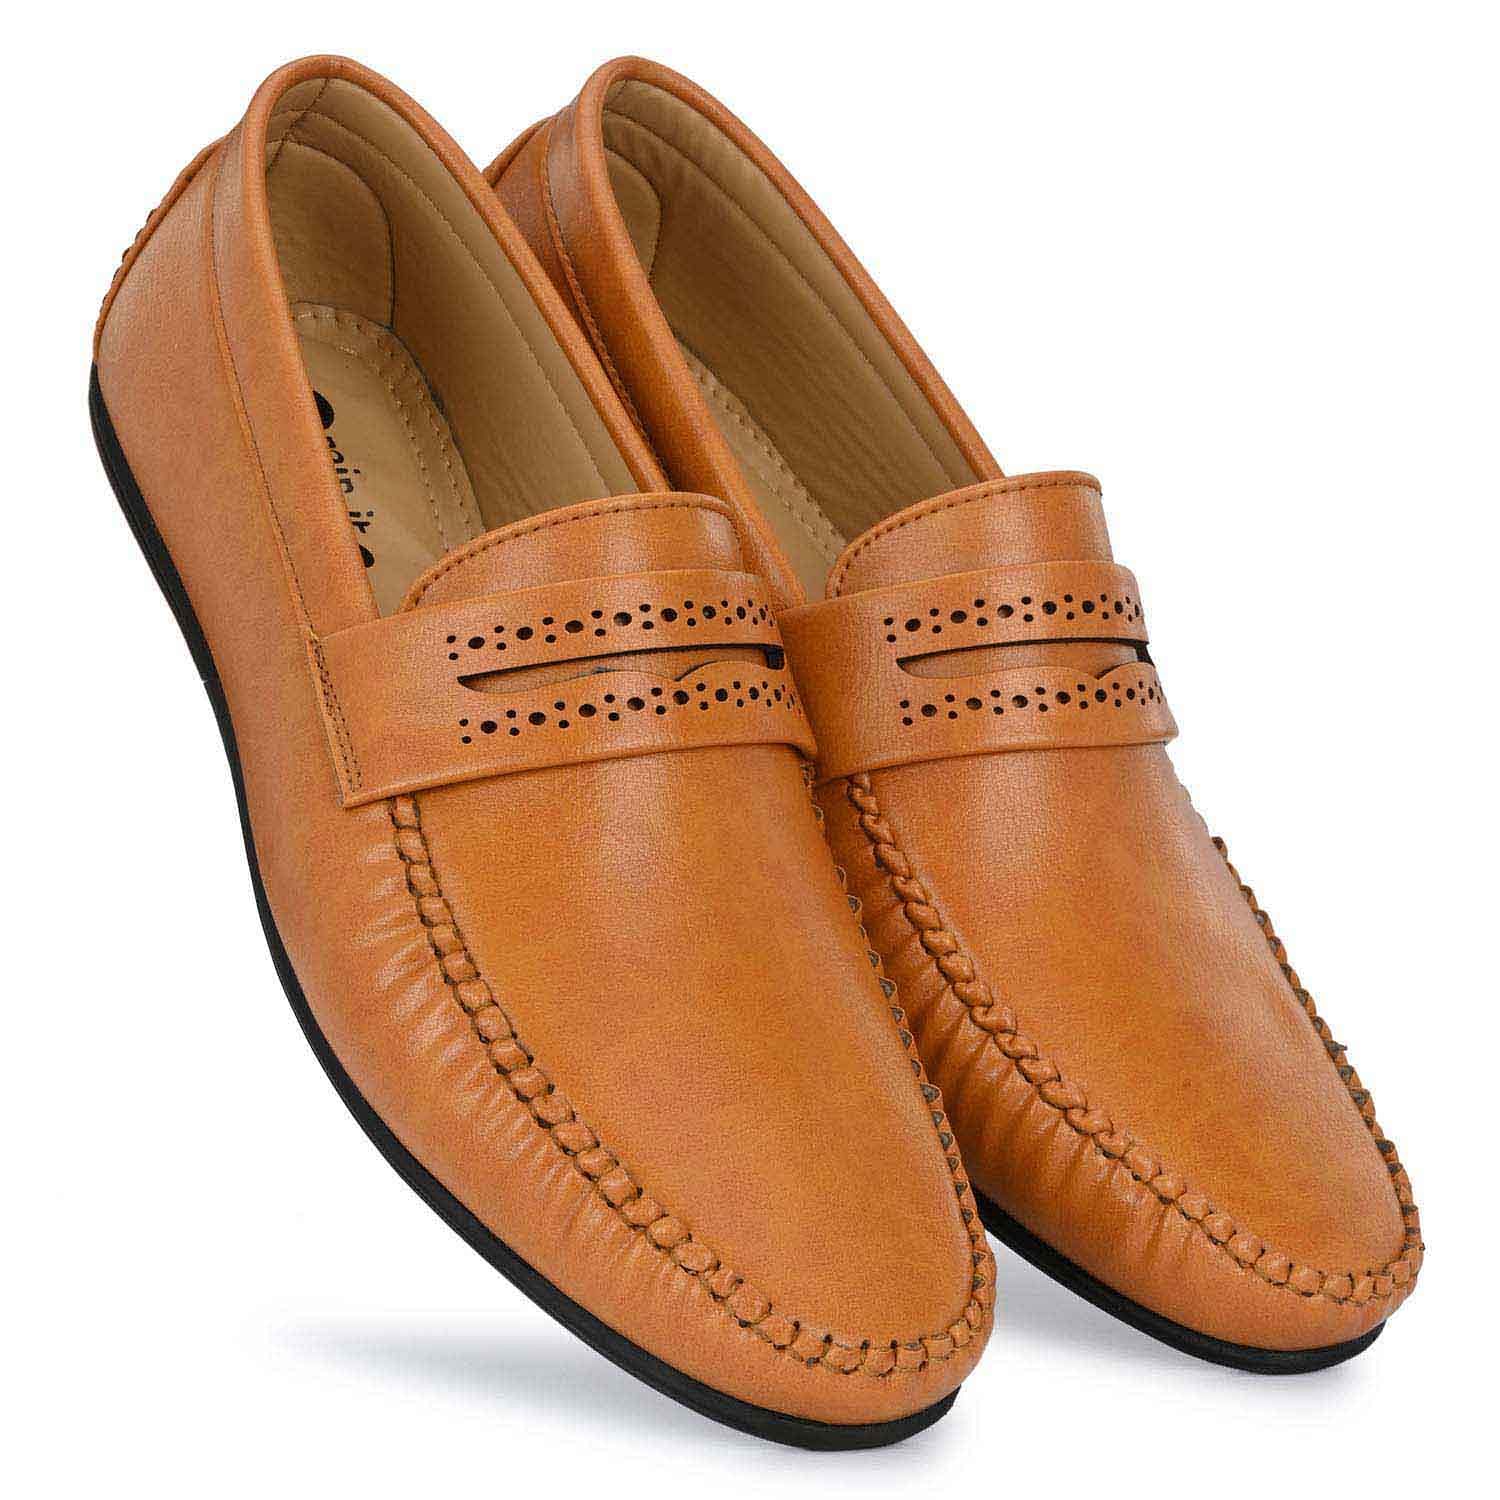 Pair-it Men's Loafers Shoes Tan - LZ-Loafer101